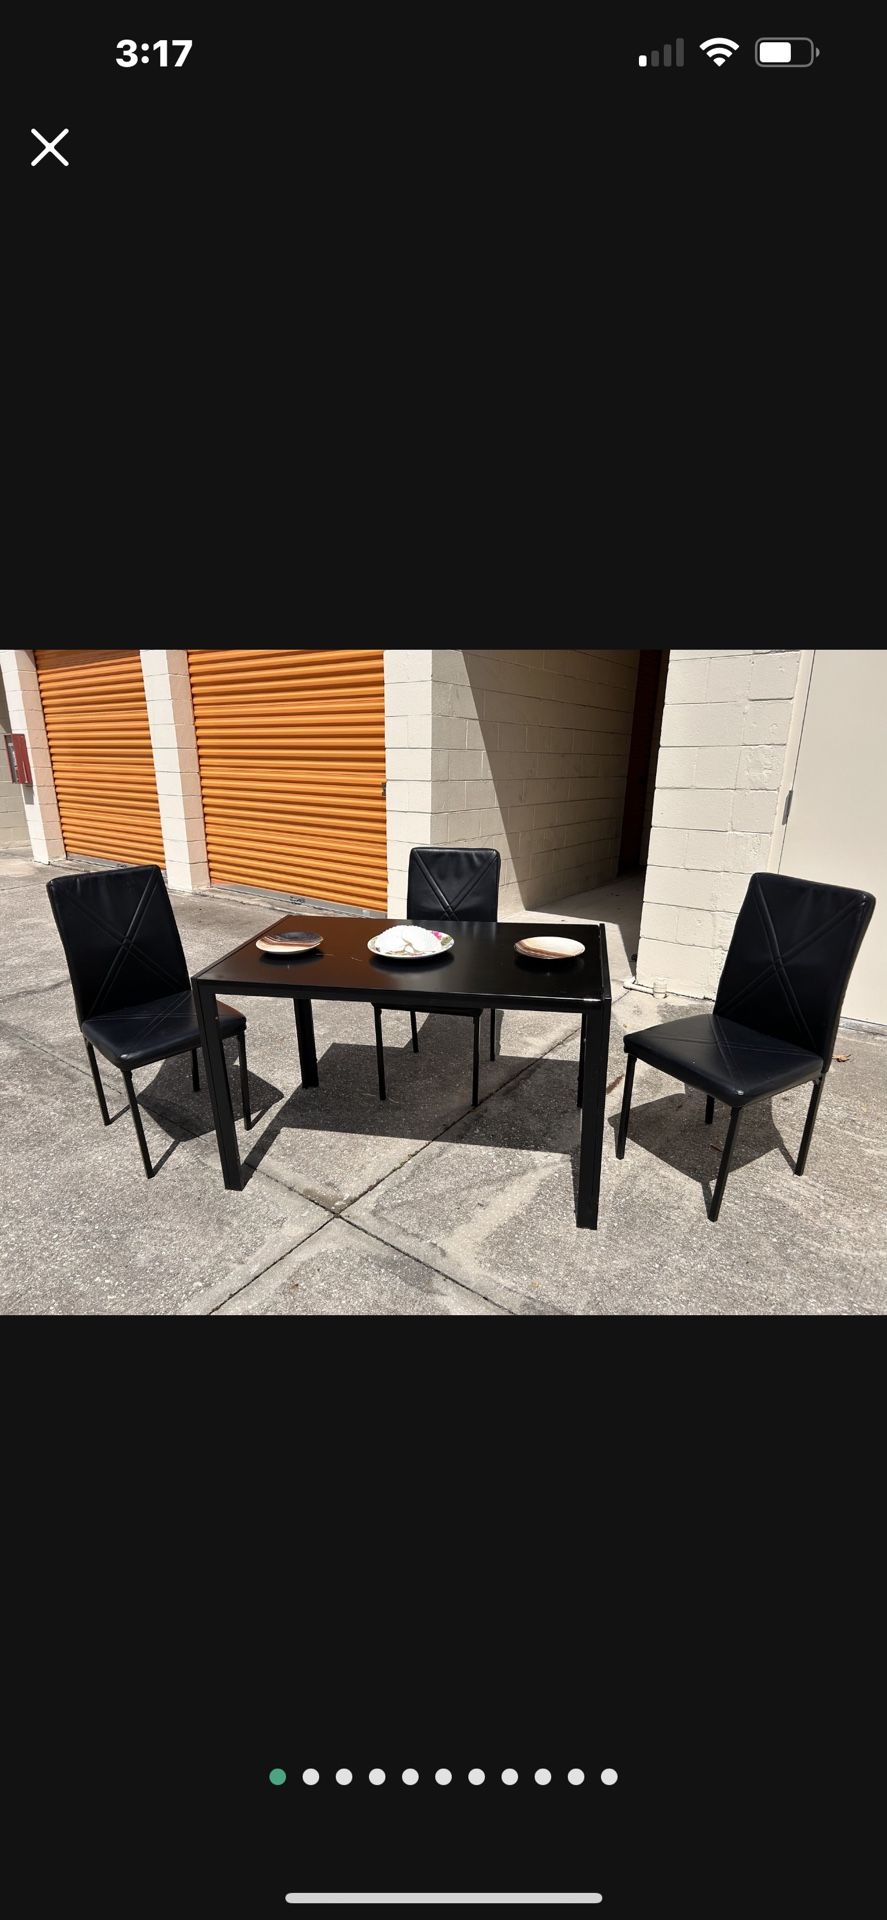 Dining Room Set $99 🎁🚚‼️🎈delivery, Table, Glass Table, Chairs, Kitchen Furniture, Kitchen Dining 